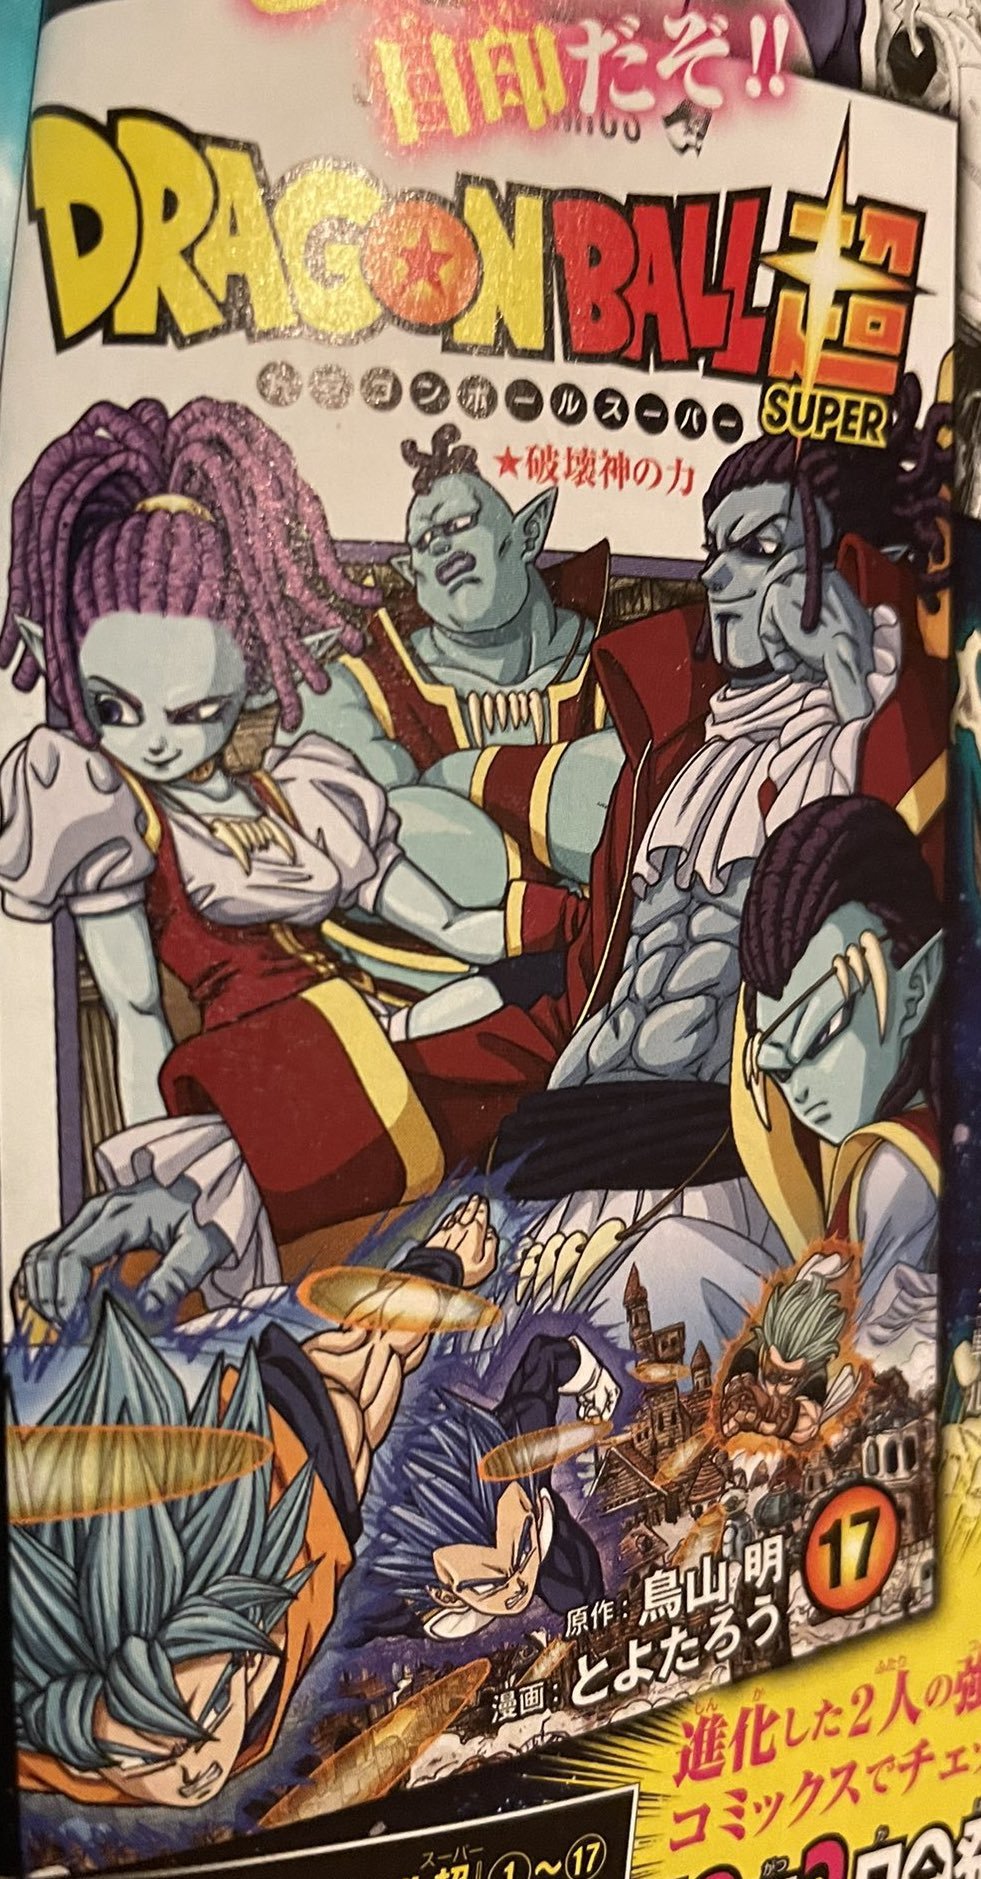 Dragon Ball Super Volume 17 Out Now!]